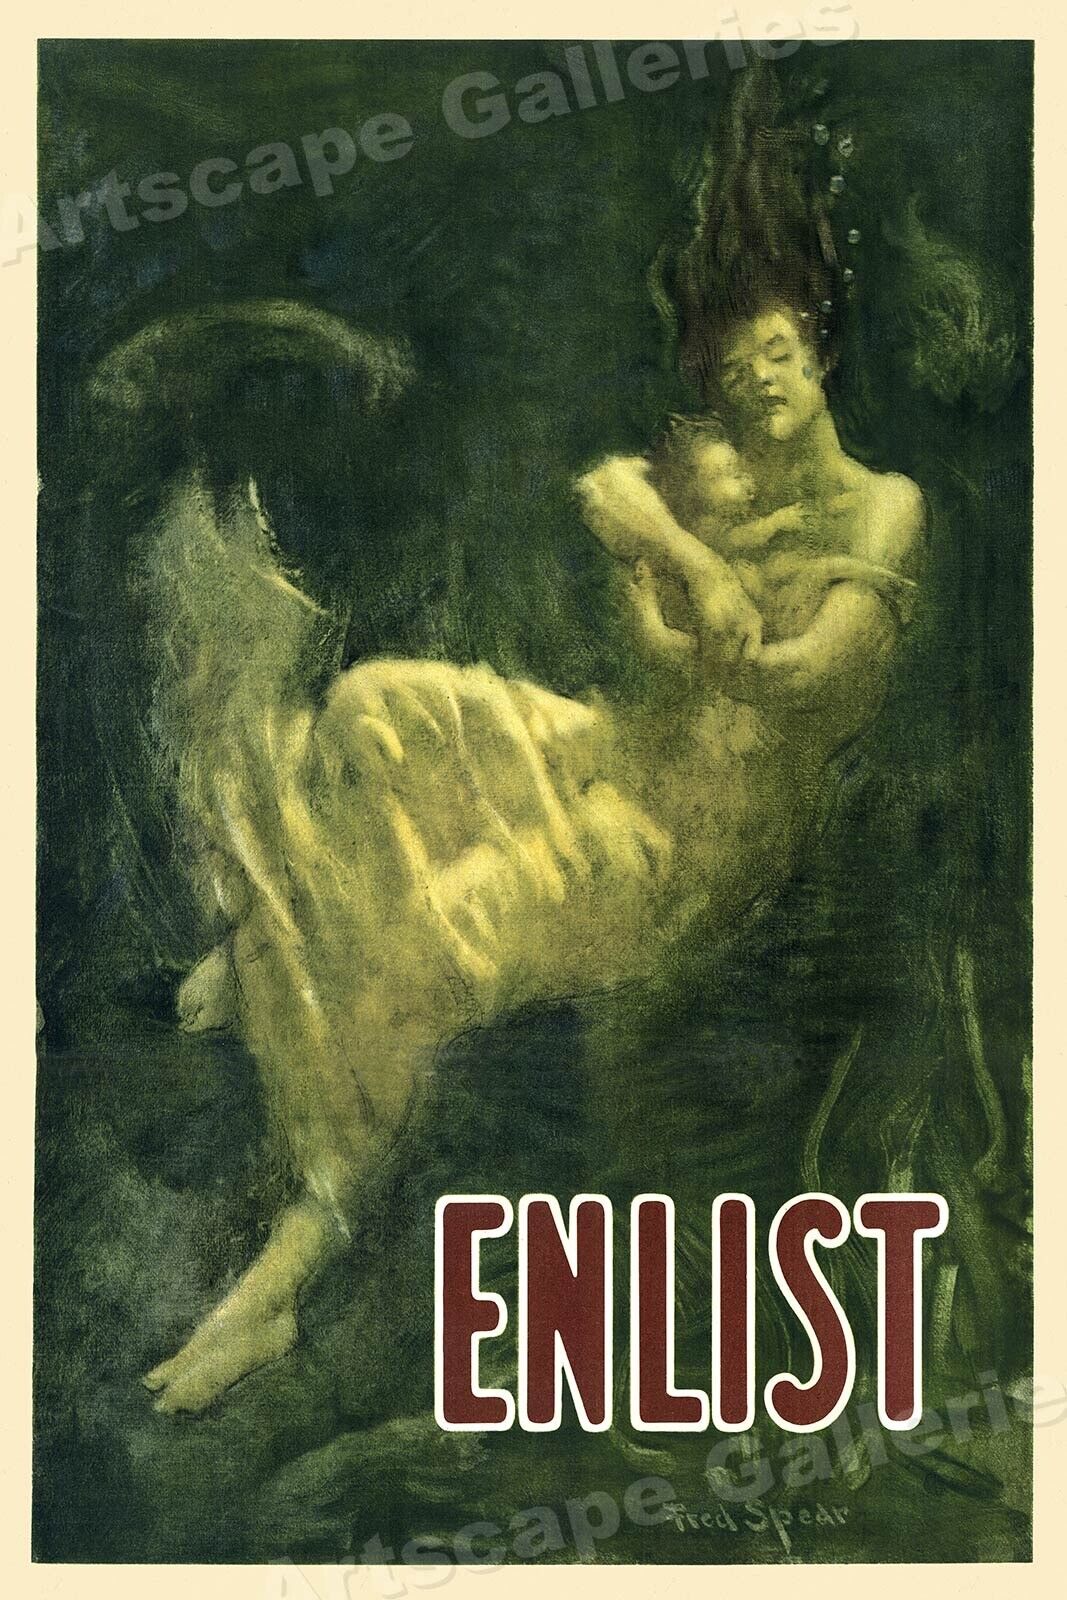 Enlist - Avenge the Lusitania Fred Spear WWI Historic Poster 20x30